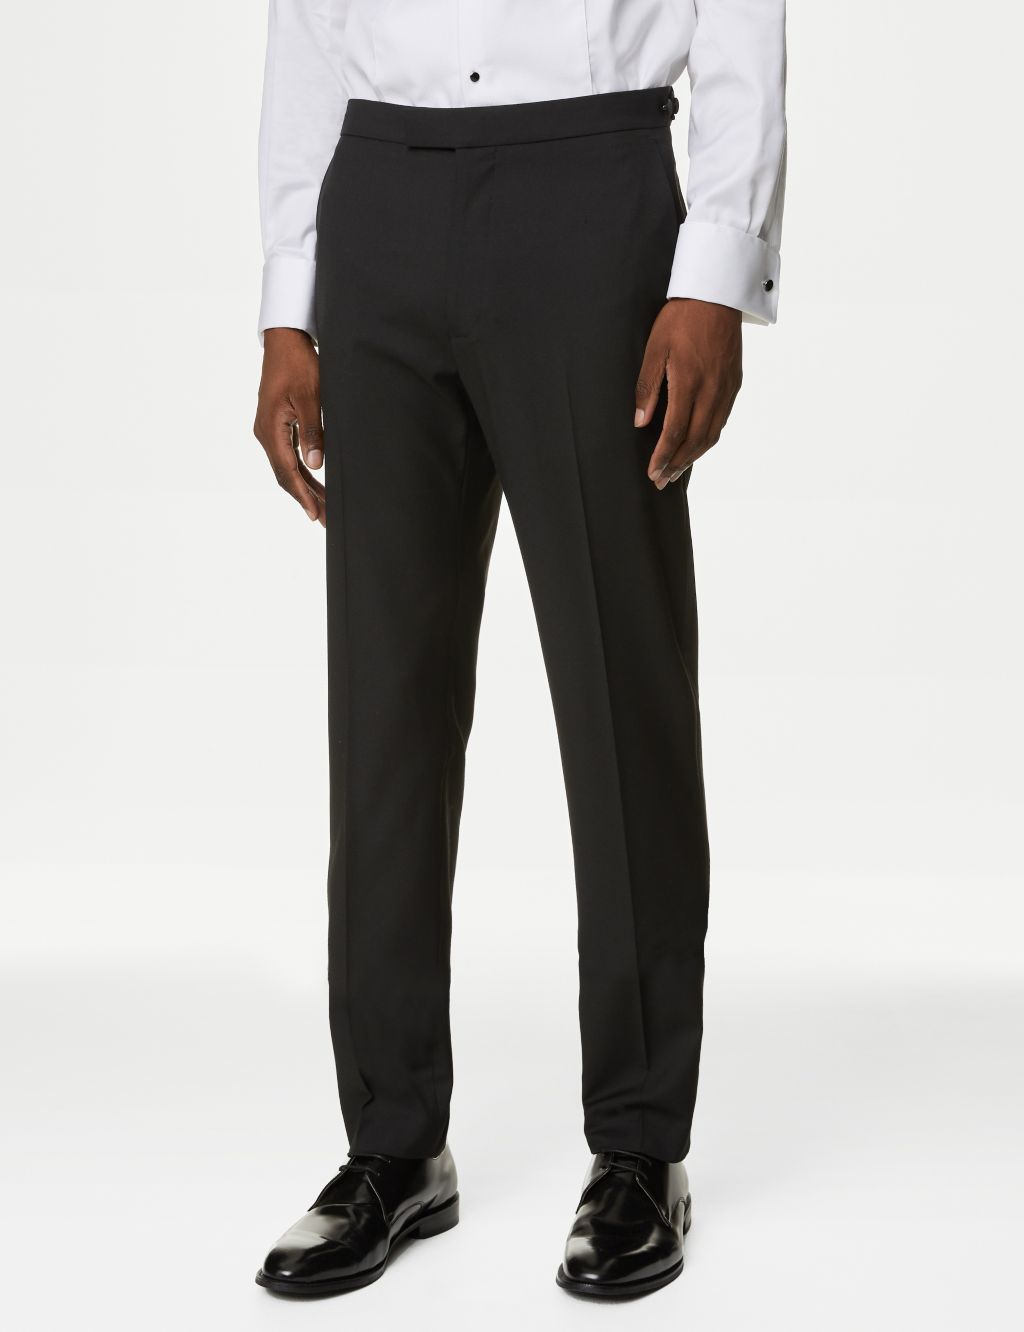 Black Men Pants with Side Satin Stripe One Piece Official Slim Fit Formal  Male Trousers Fashion